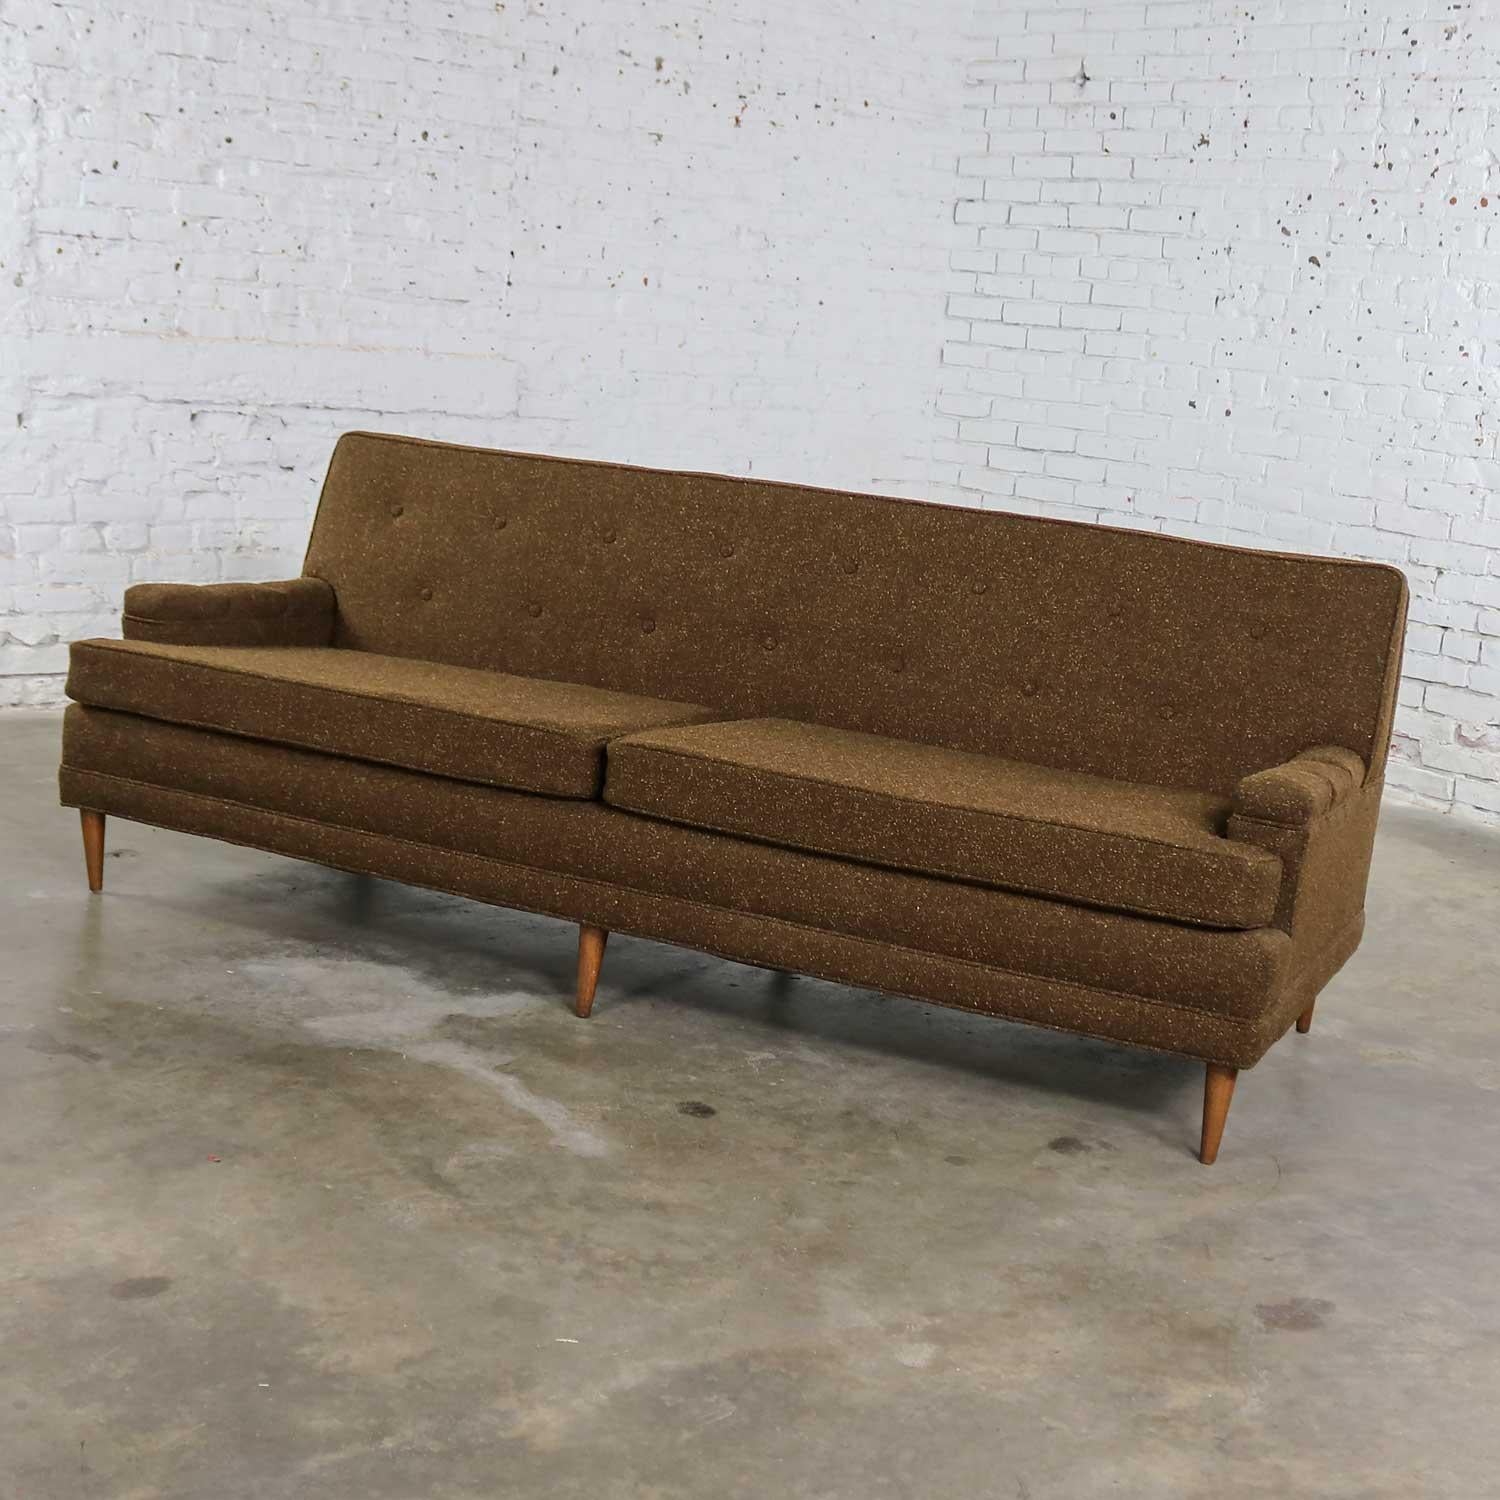 Handsome MCM sofa in a Lawson style with a tight button back and covered in a nice brown tweed. It is made in the manner of Milo Baughman or Edward Wormley.  Beautiful condition, keeping in mind that this is vintage and not new so will have signs of